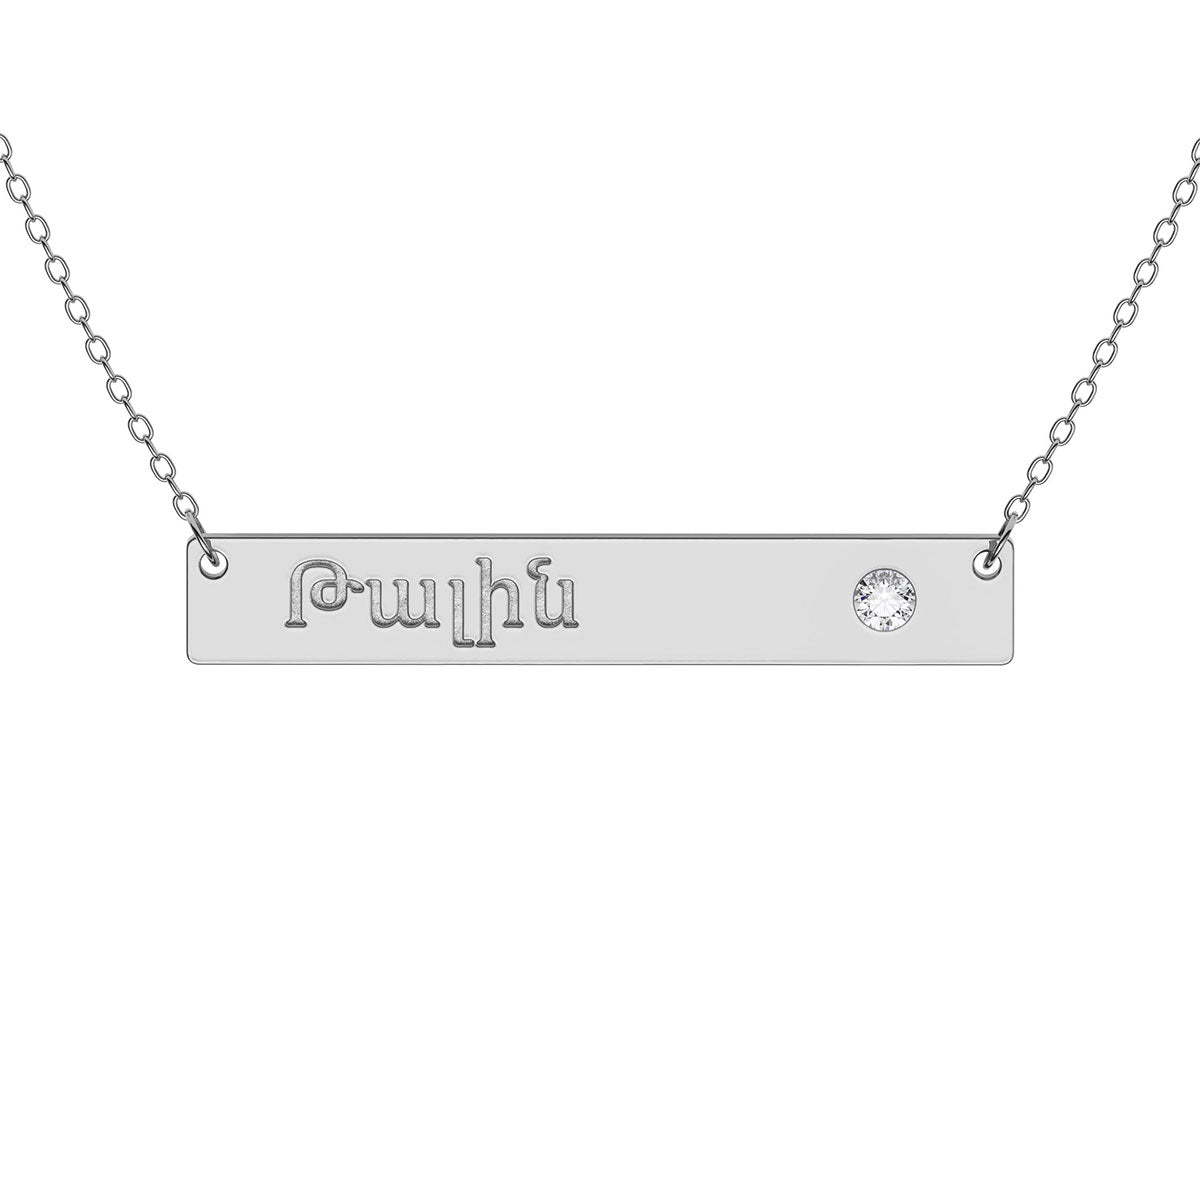 Bar Necklace with Armenian Engraving and Stone